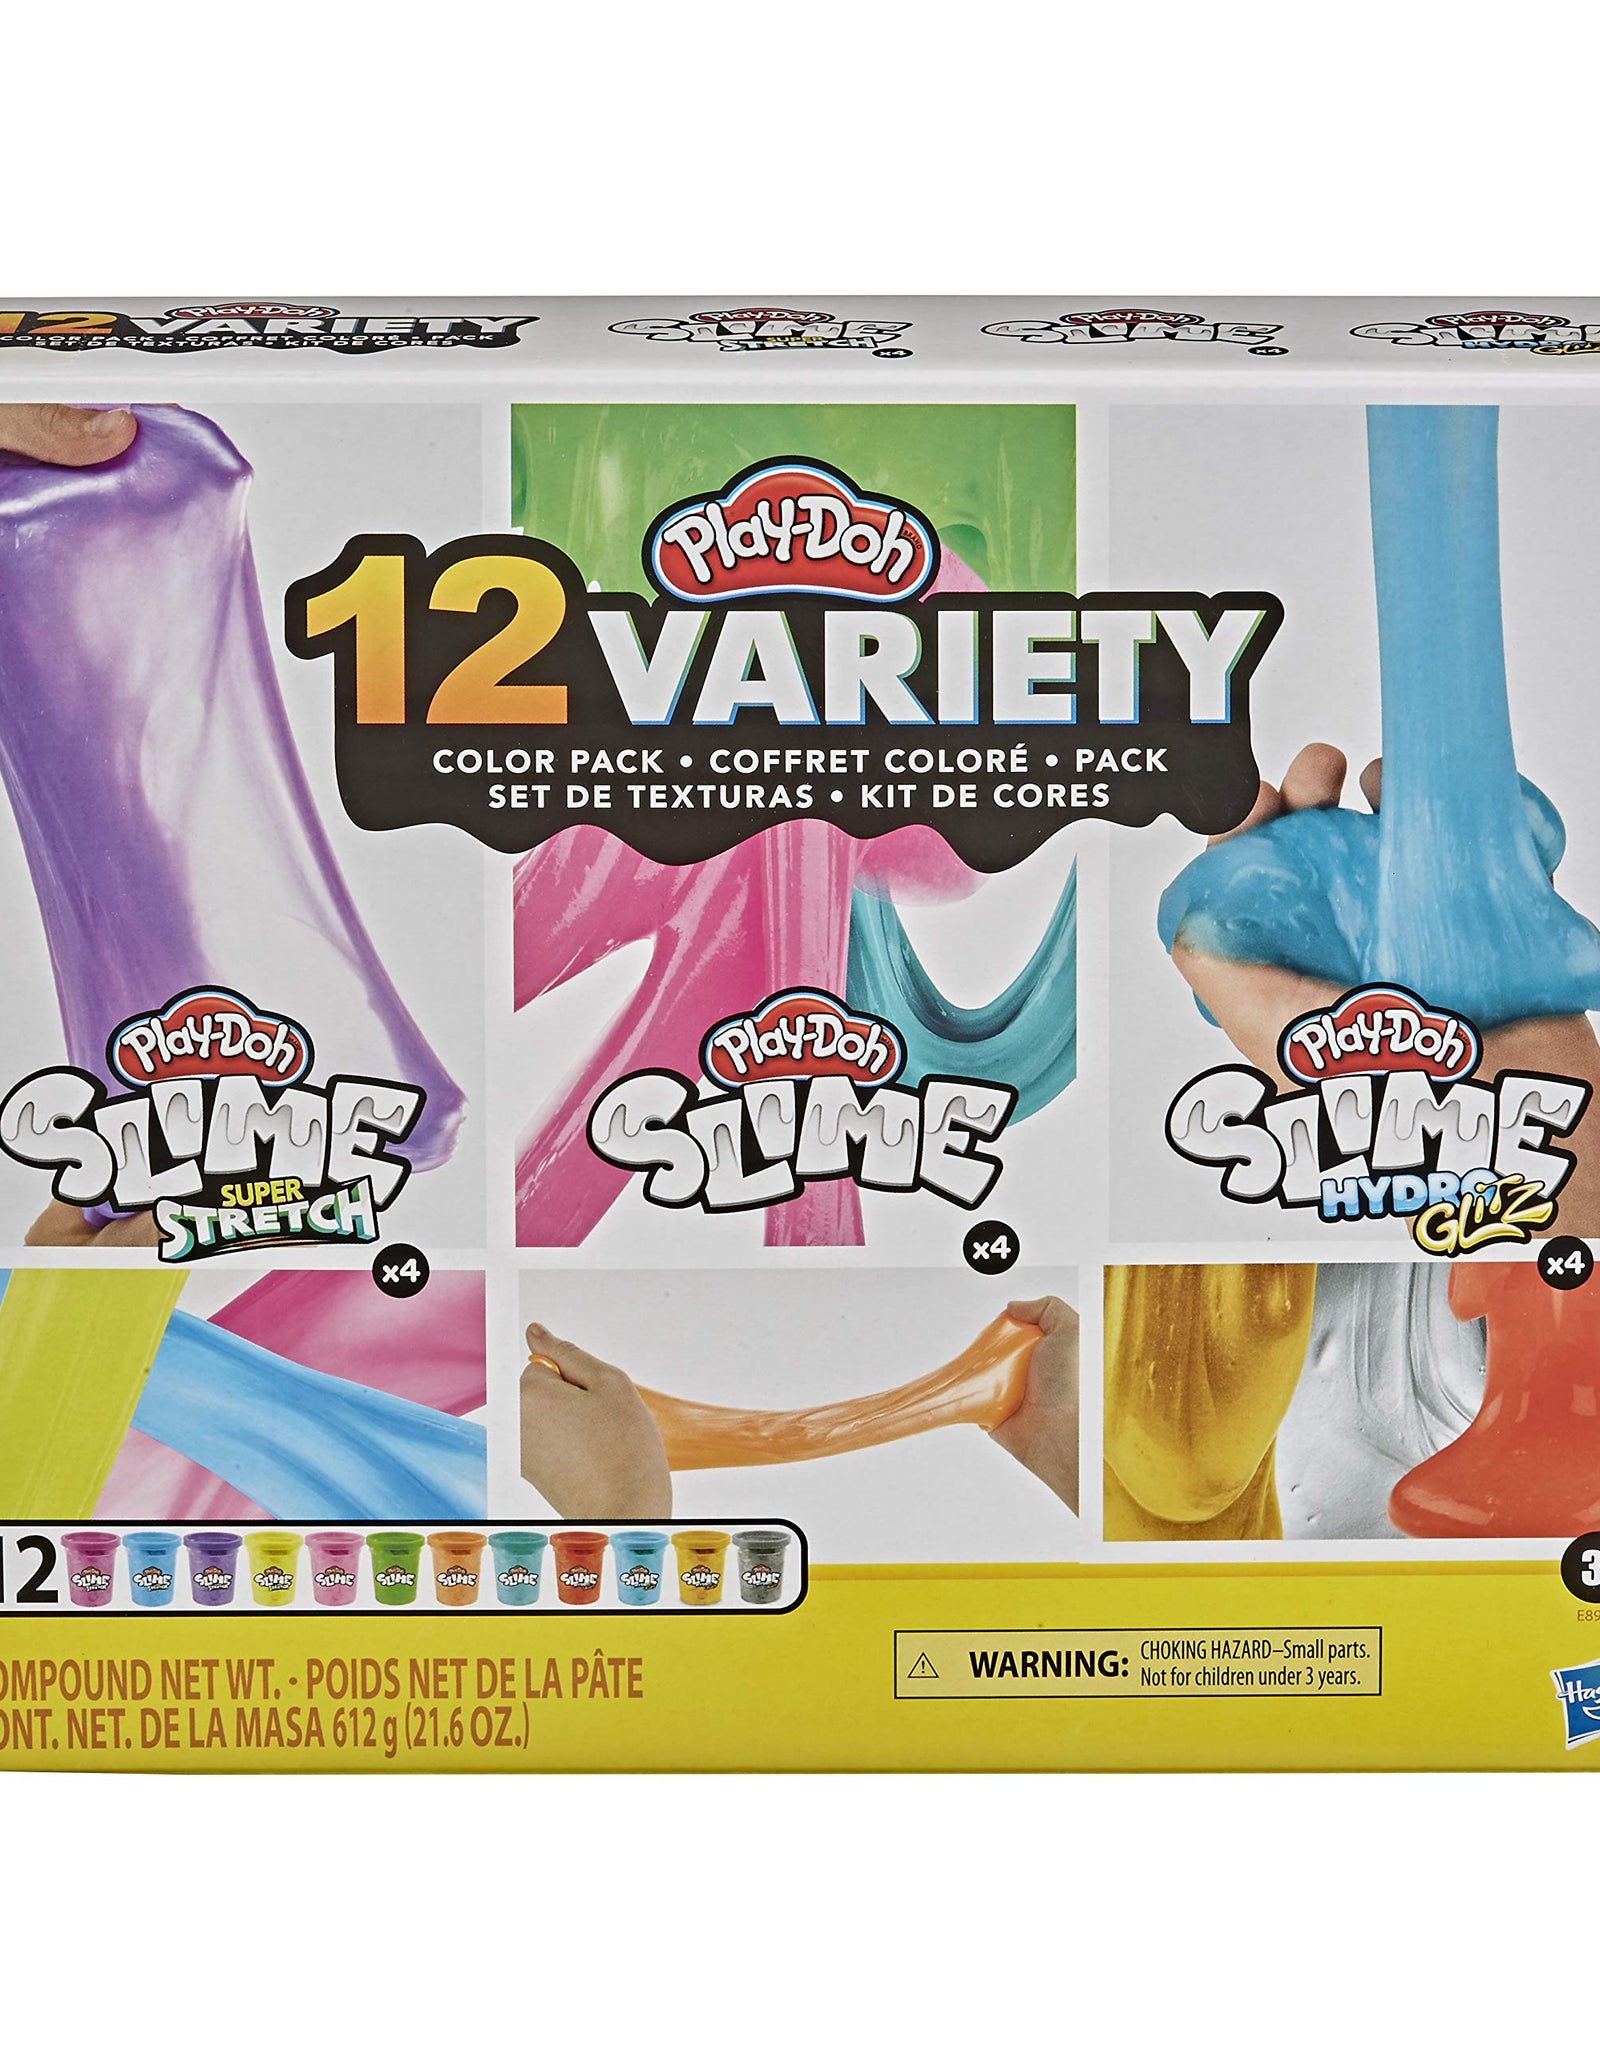 Play-Doh Slime: Super Stretch, and HydroGlitz 12 Color Variety Pack for Kids 3 Years and Up, 1.8-Ounce Cans, Non-Toxic, Assorted Colors, Includes 2 Tools